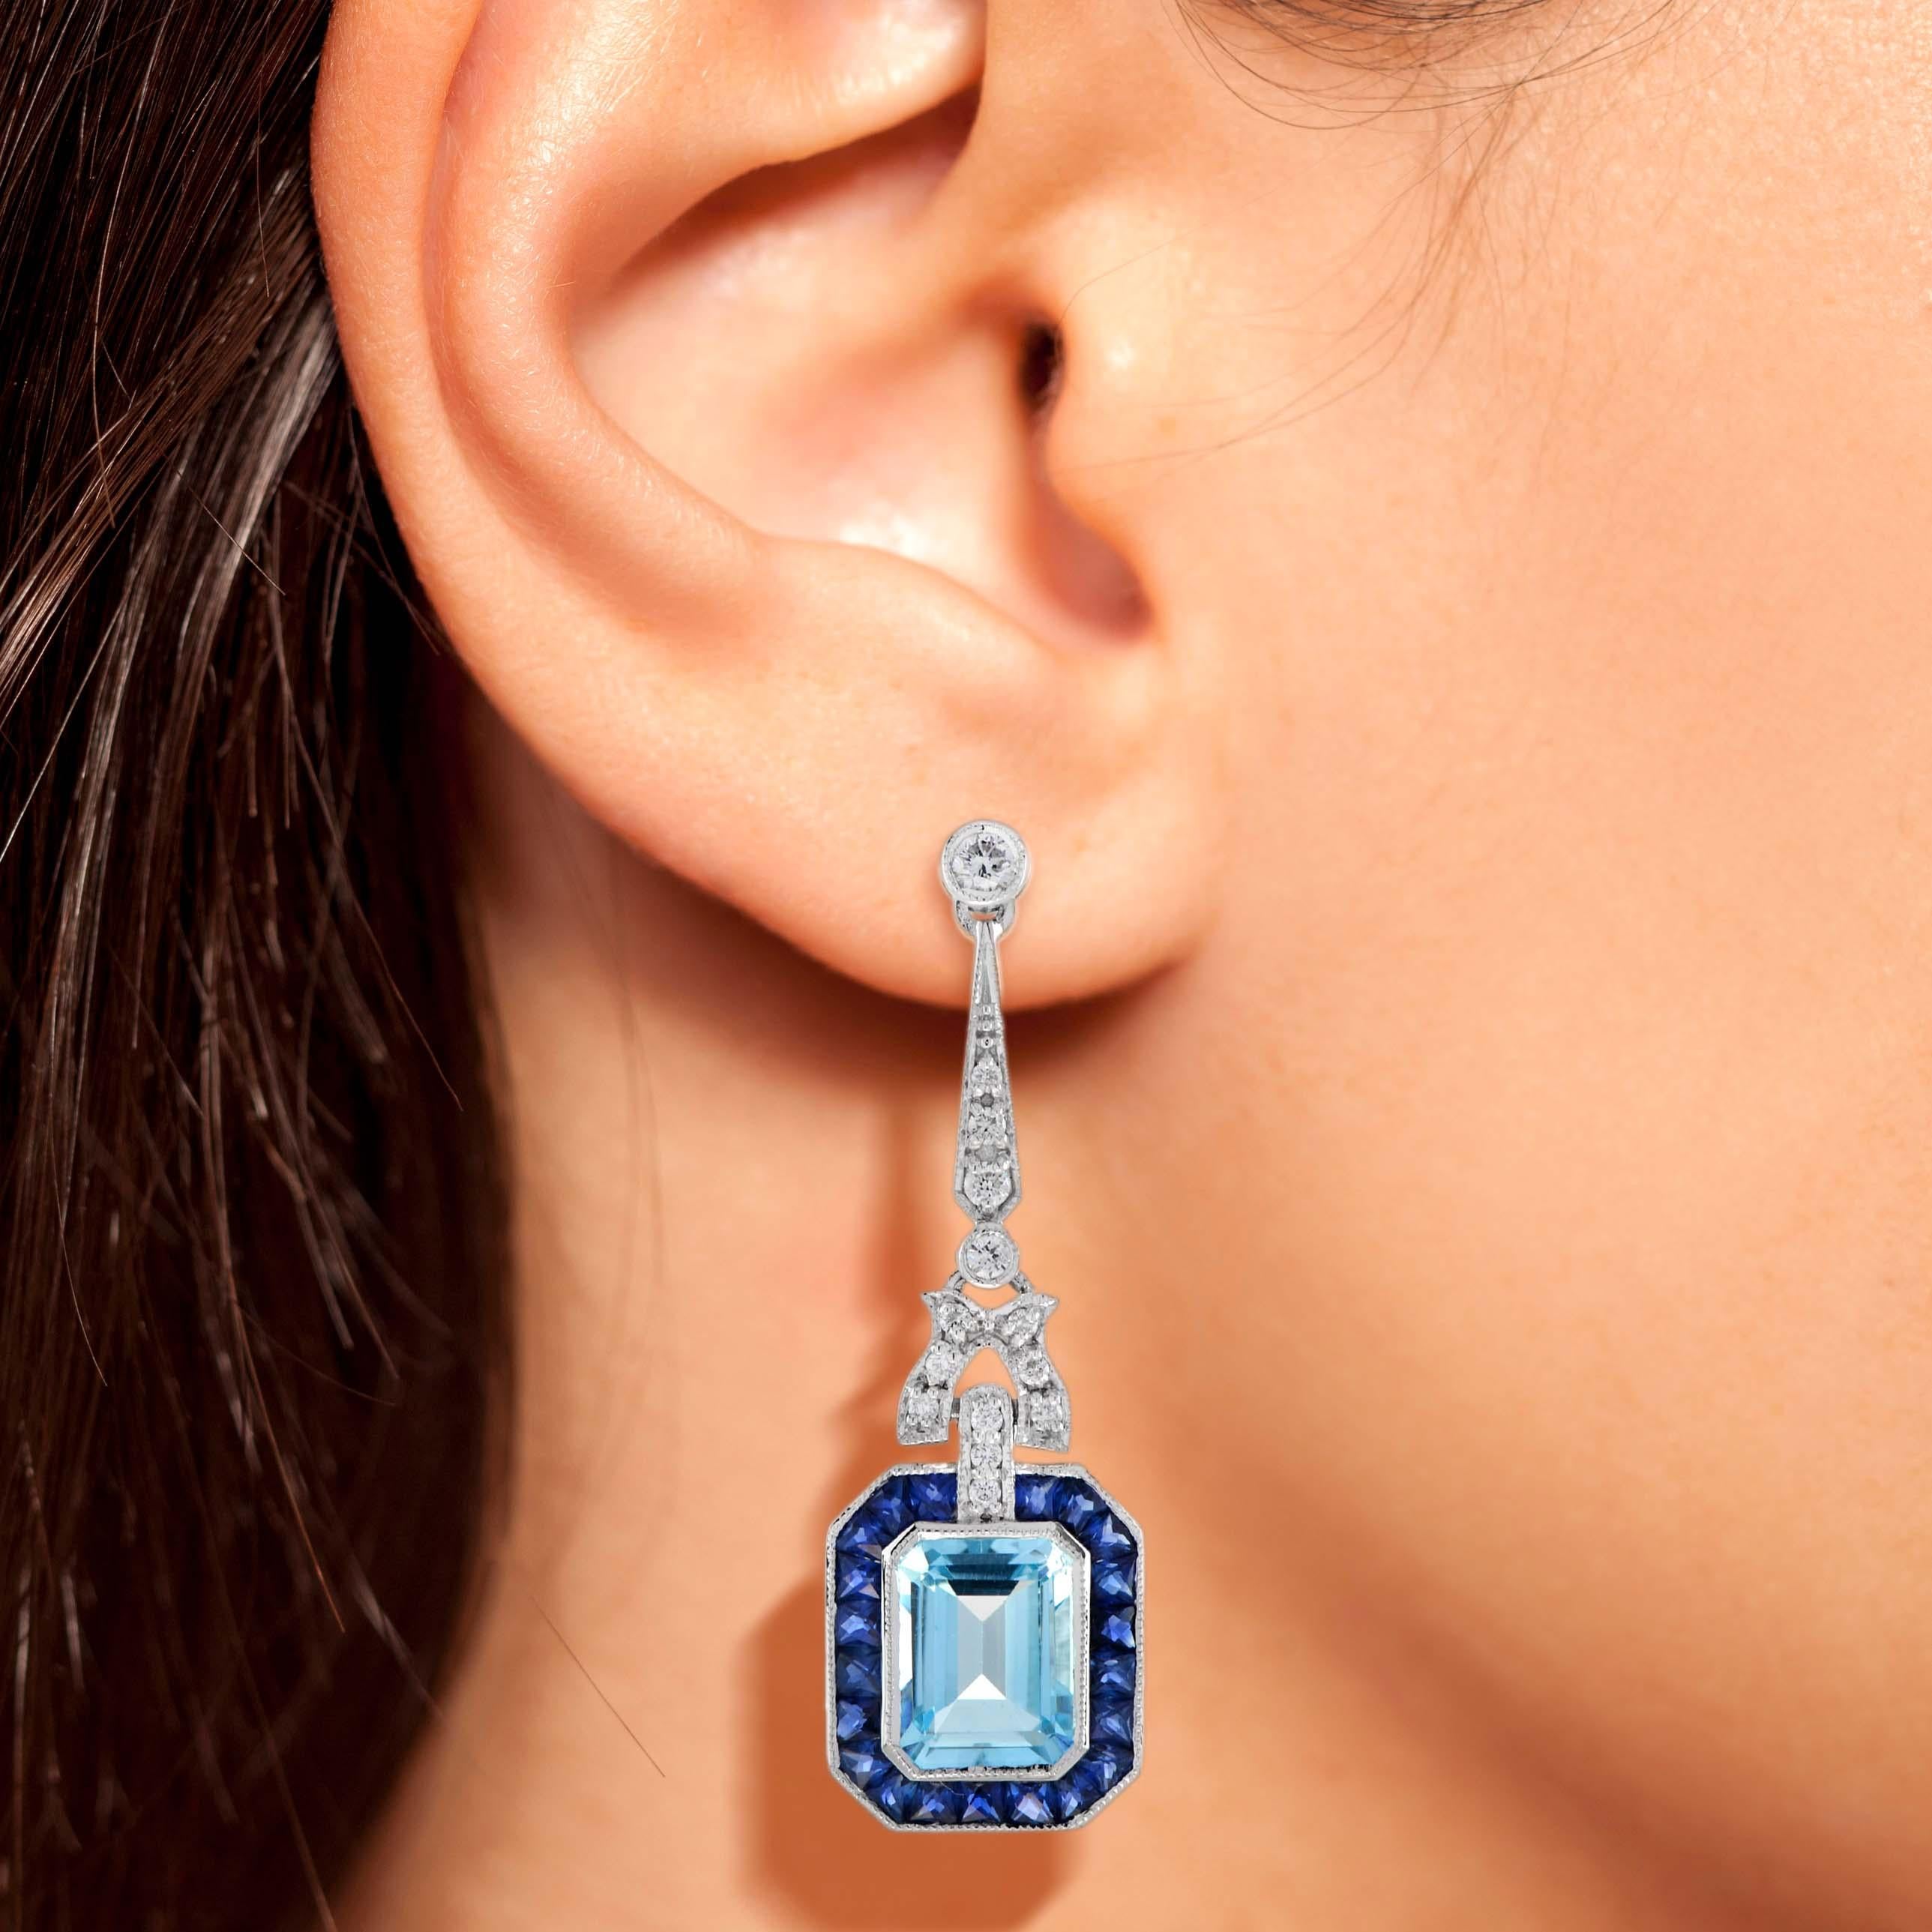 A pair of emerald cut blue topaz stones, precisely matched by eye, totaling 5.90 carats, and set into a pair of exquisite drop ear studs. These exquisite earrings are complimented by 3.78 carats of French cut blue sapphire and round diamonds